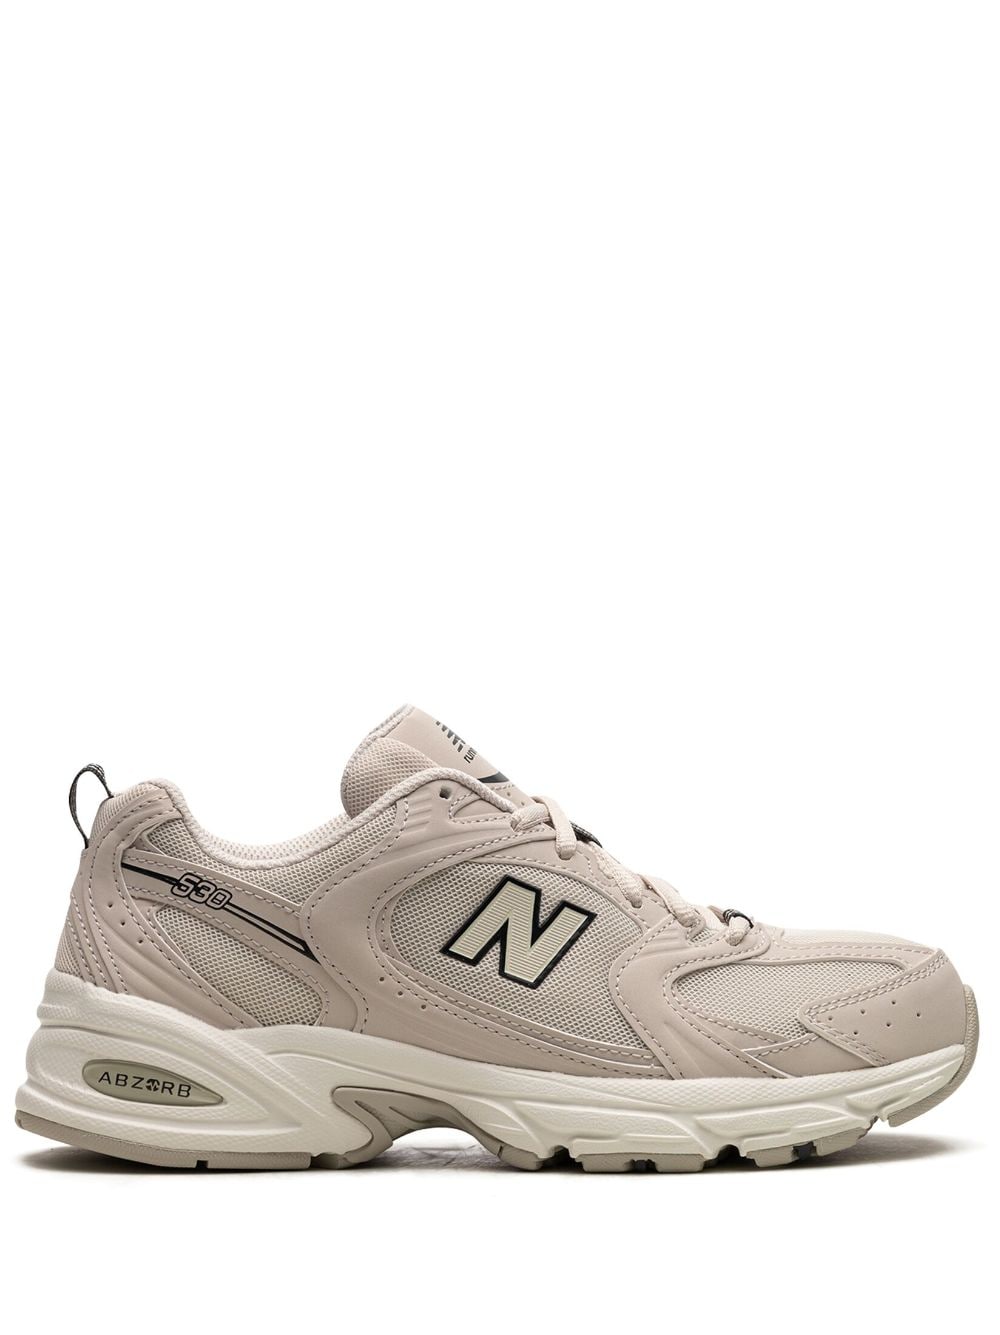 New Balance 530 "Ivory" sneakers - Neutrals